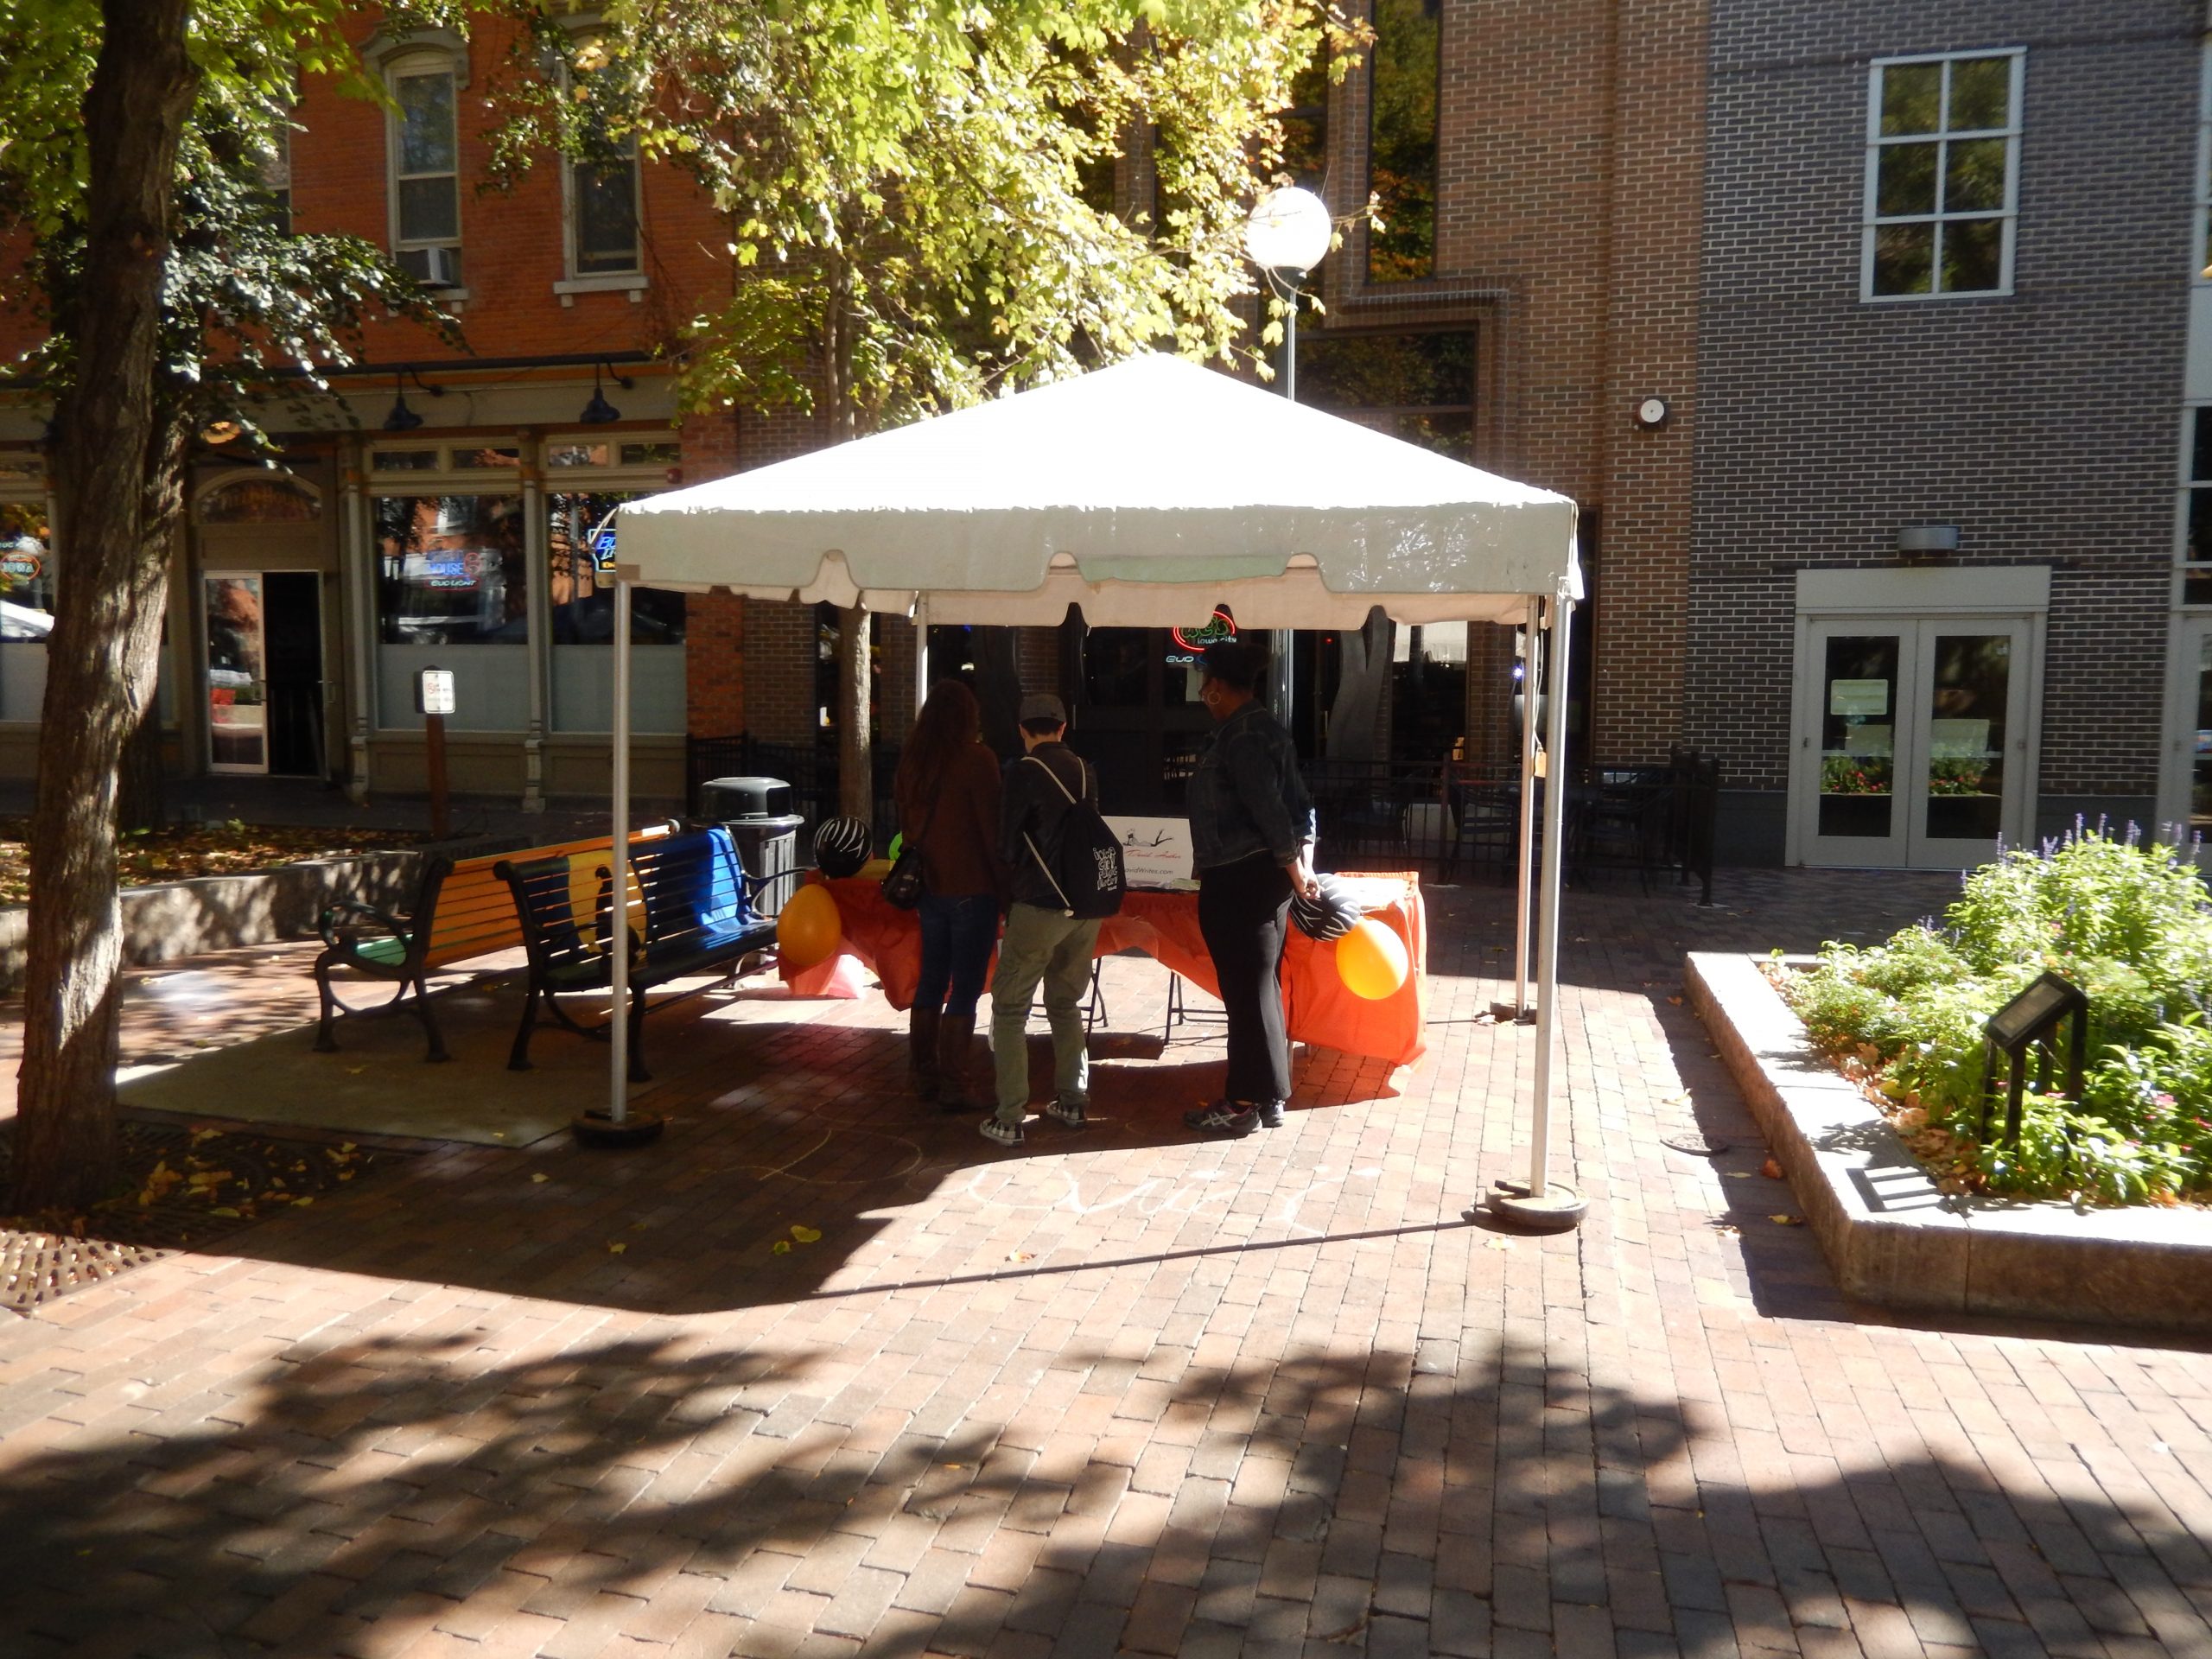 Author Eliza David’s booth at the 2015 Iowa City Book Festival in the pedestrian mall in Iowa city